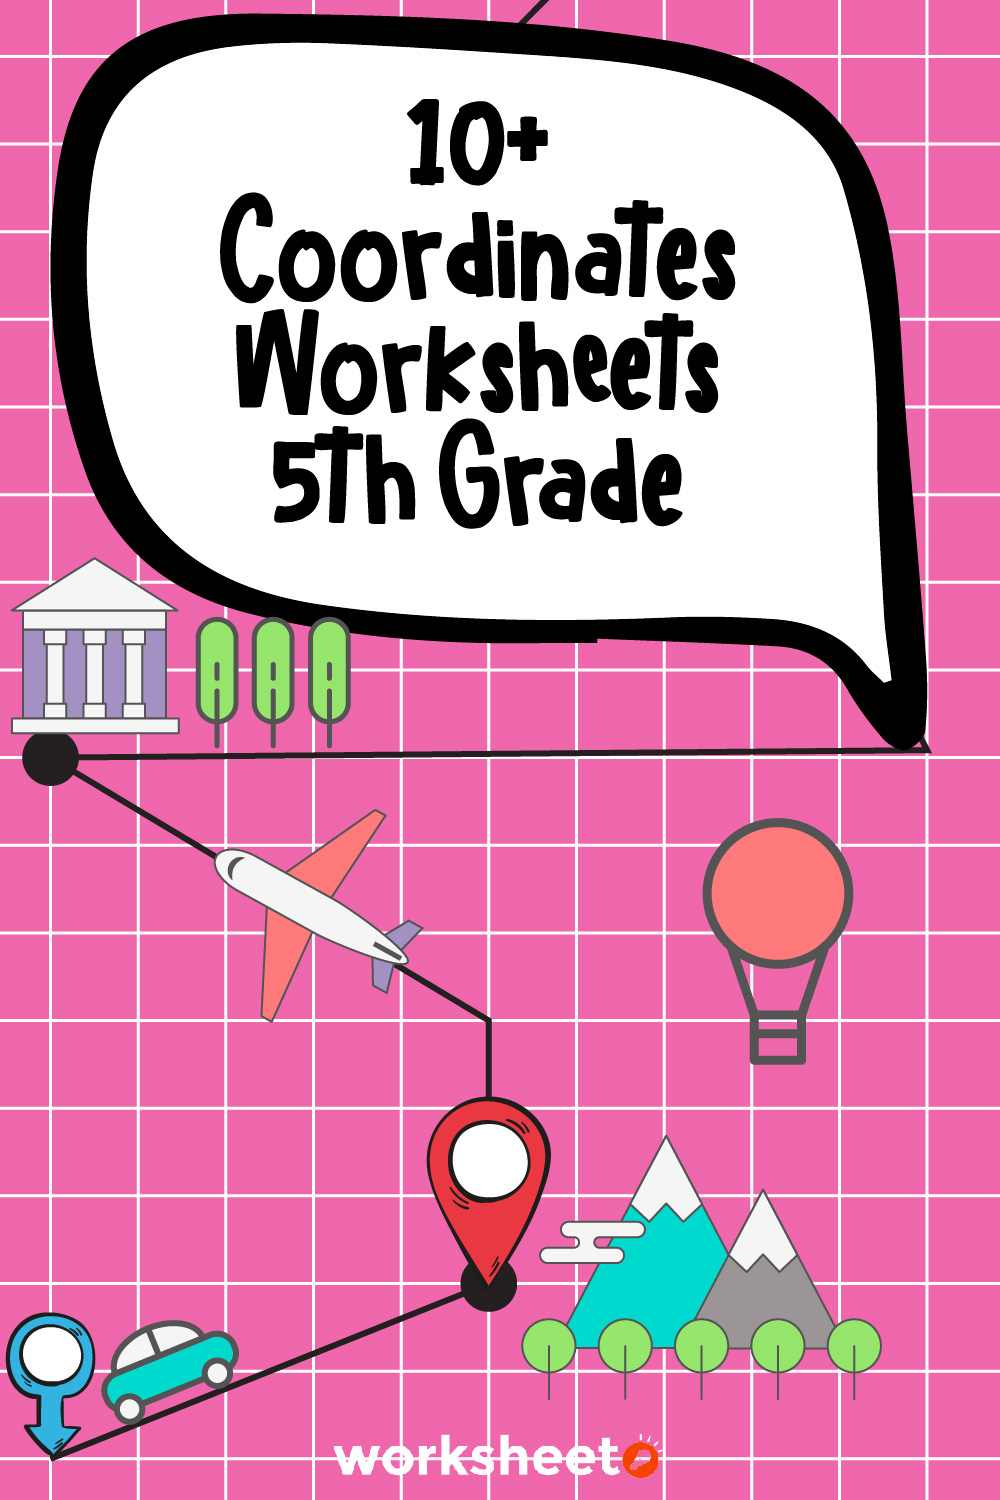 12 Images of Coordinates Worksheets 5th Grade